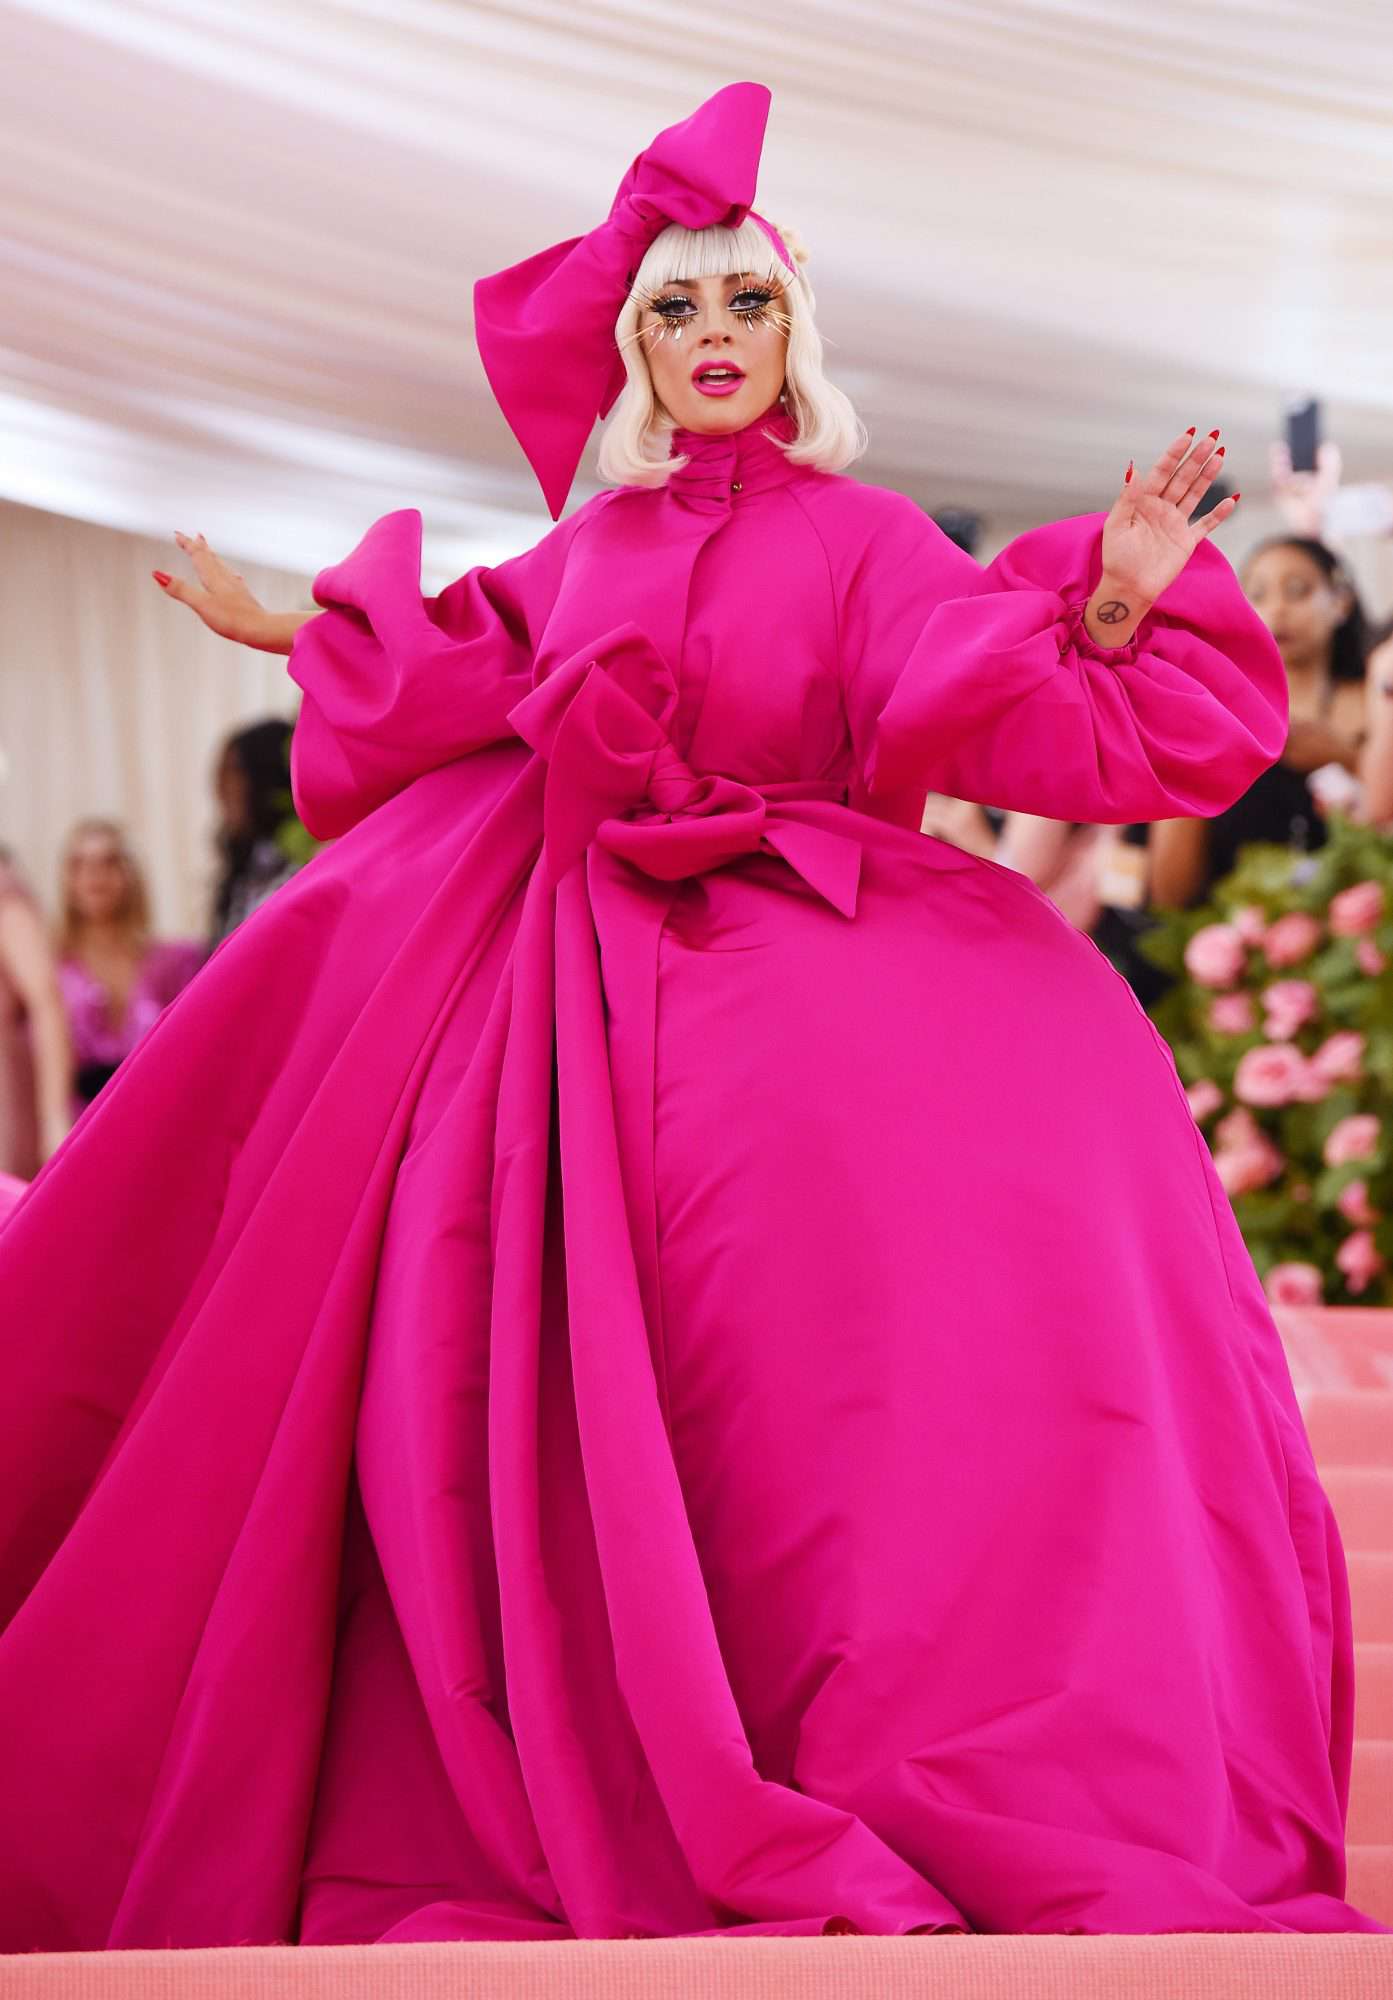 Draped in History Revisiting the Most Memorable Met Gala Themes-Image 9